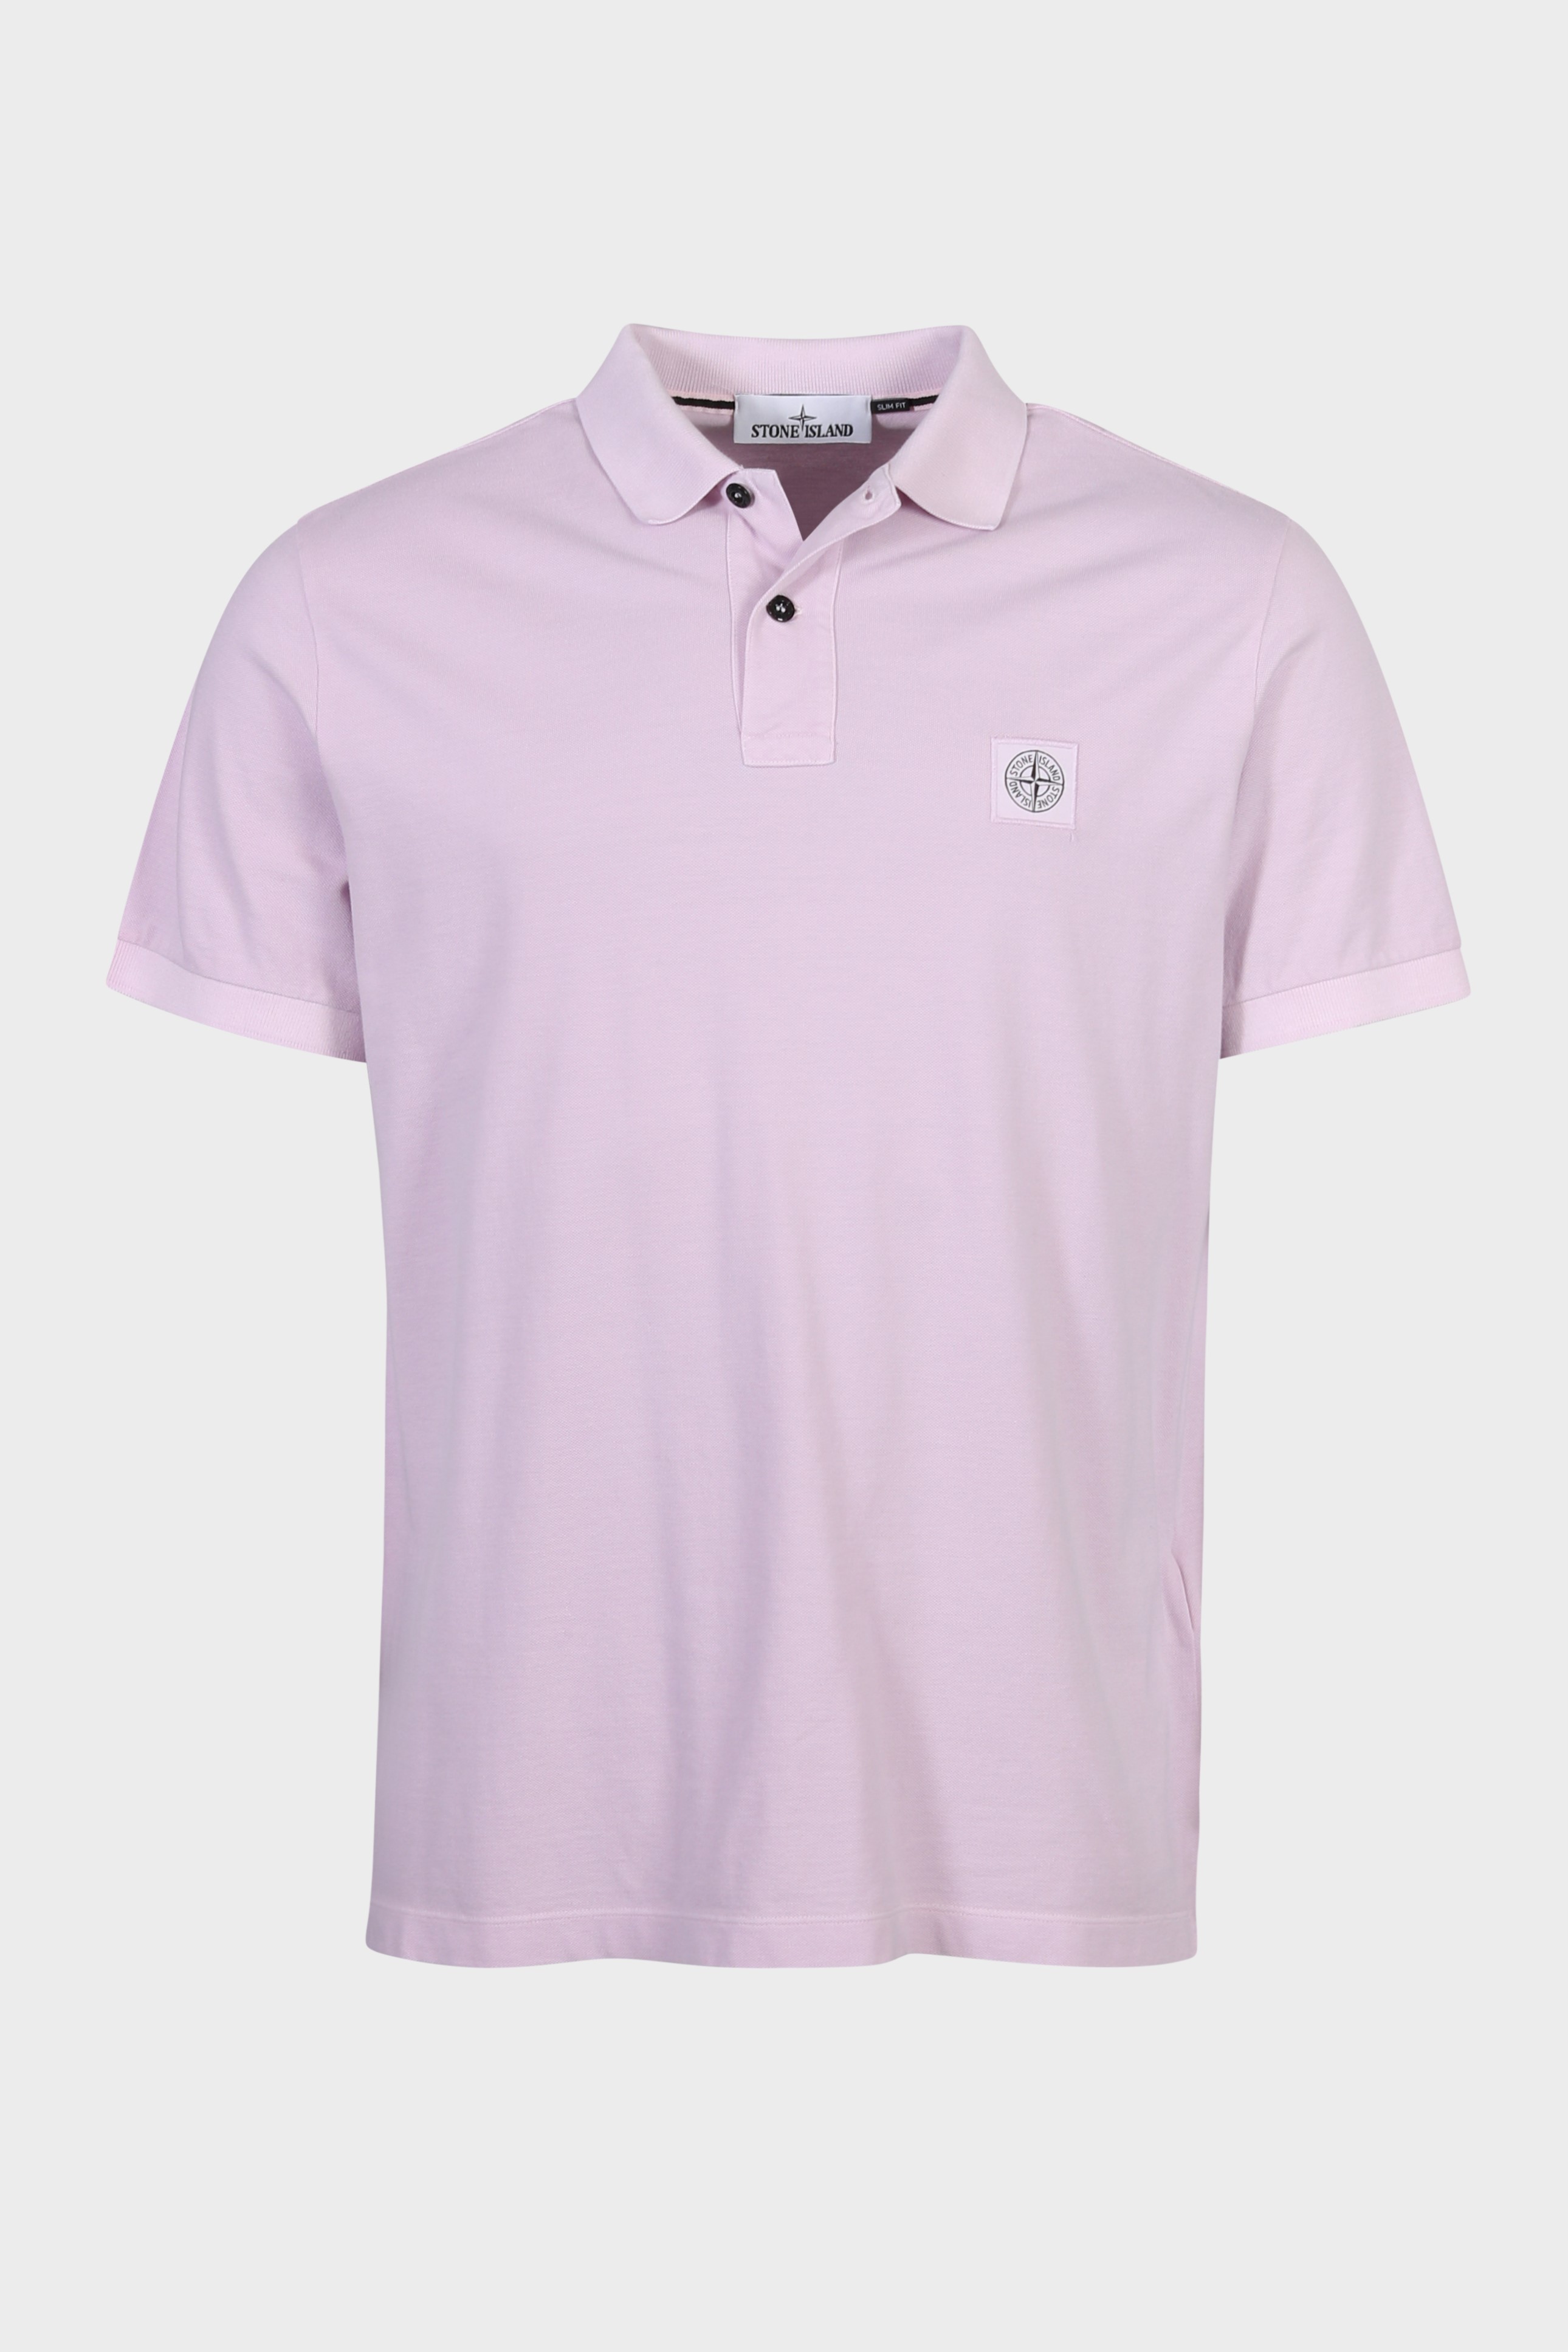 STONE ISLAND Polo Shirt in Light Pink 3XL